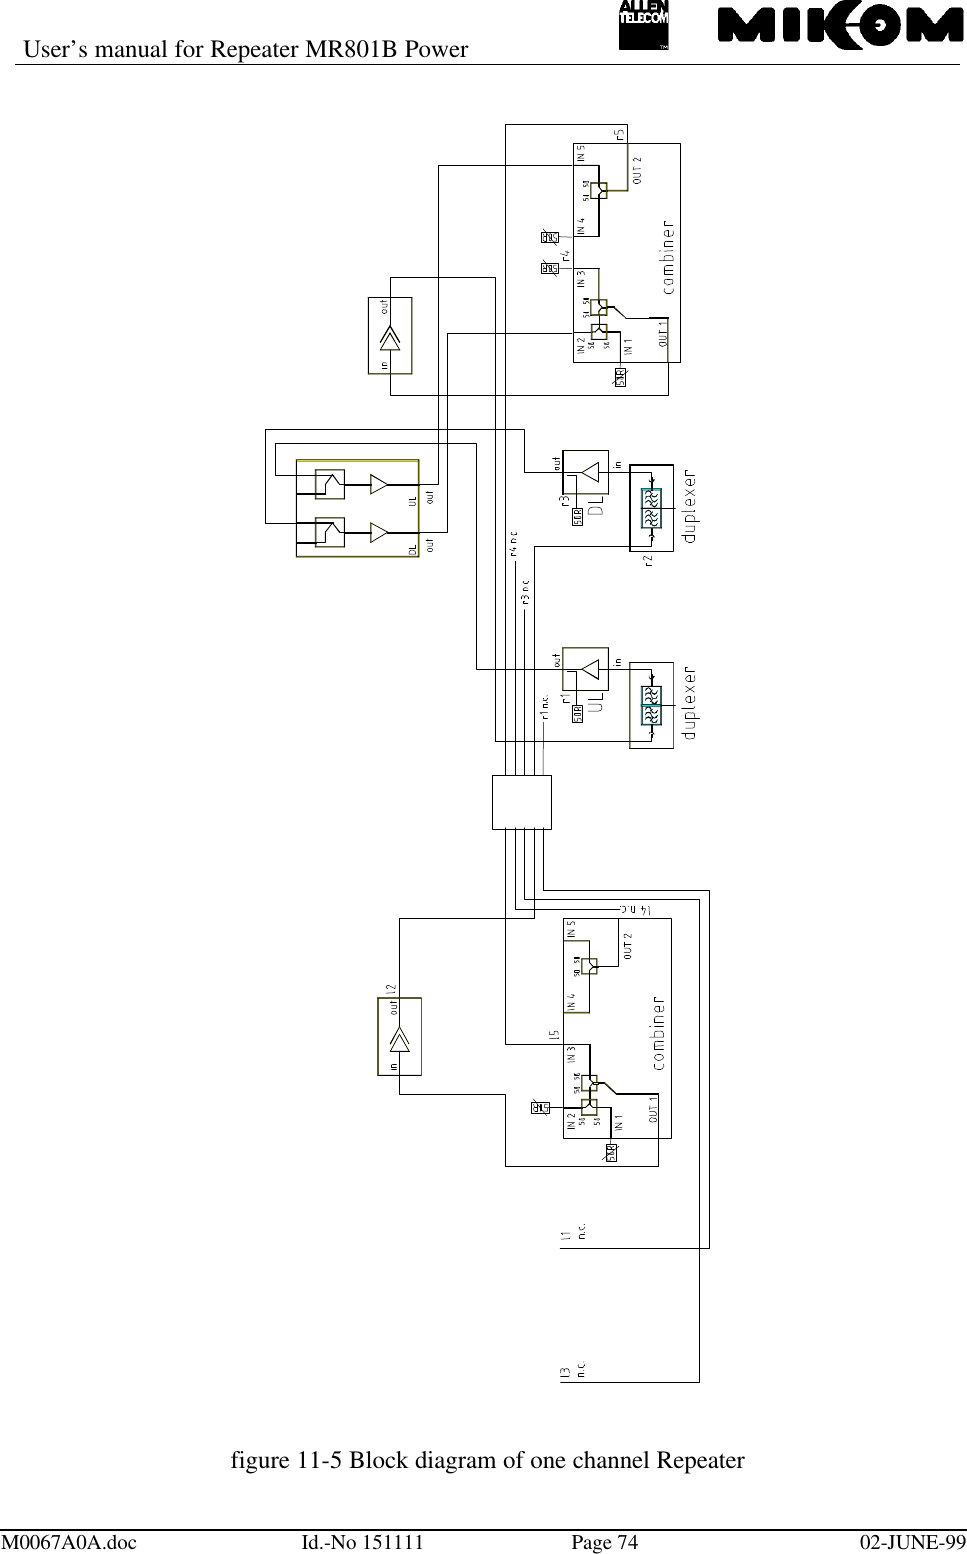 User’s manual for Repeater MR801B PowerM0067A0A.doc Id.-No 151111 Page 74 02-JUNE-99figure 11-5 Block diagram of one channel Repeater